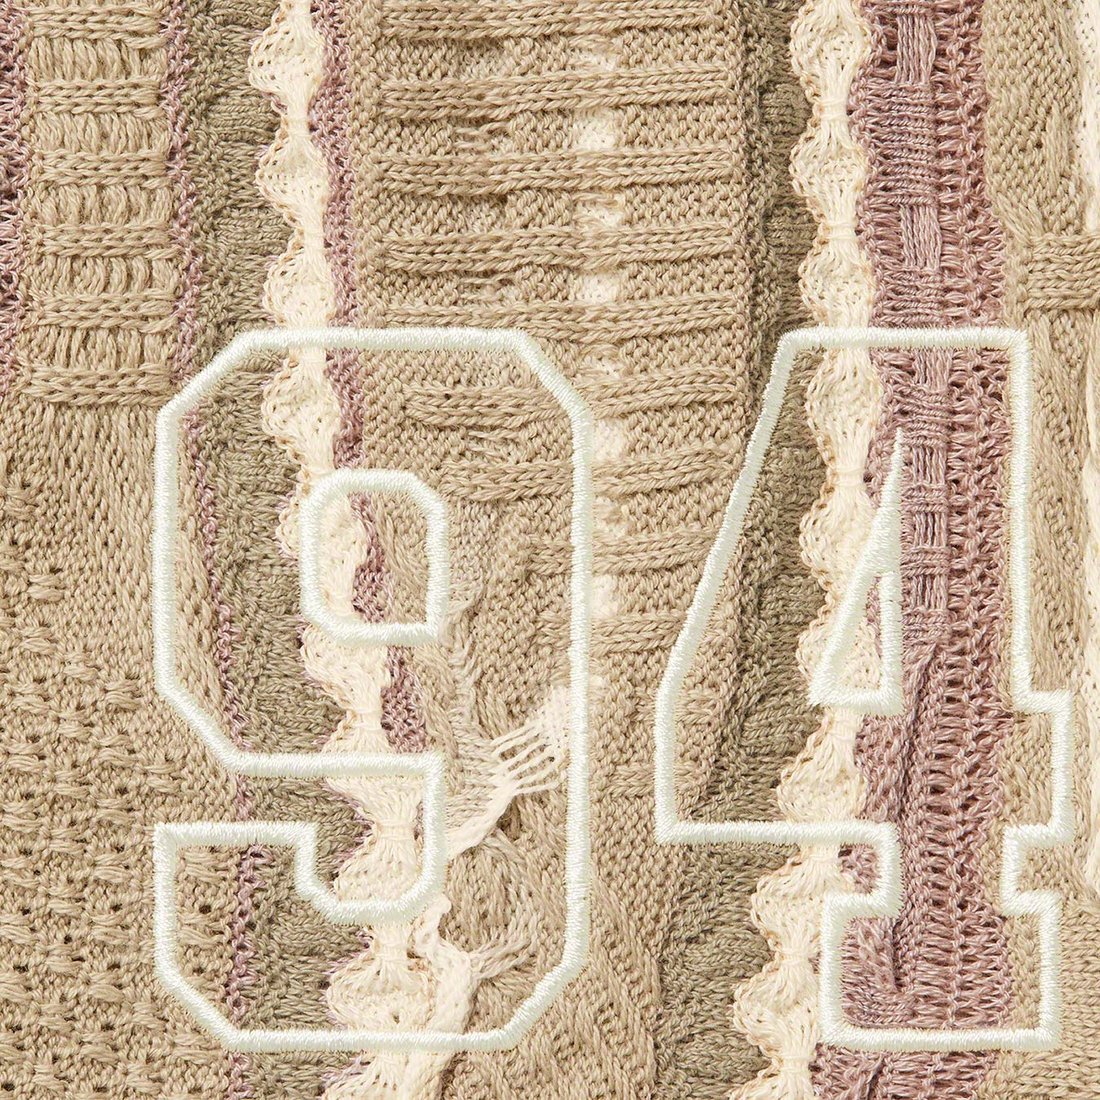 Details on Supreme Coogi Basketball Short Tan from spring summer
                                                    2023 (Price is $168)